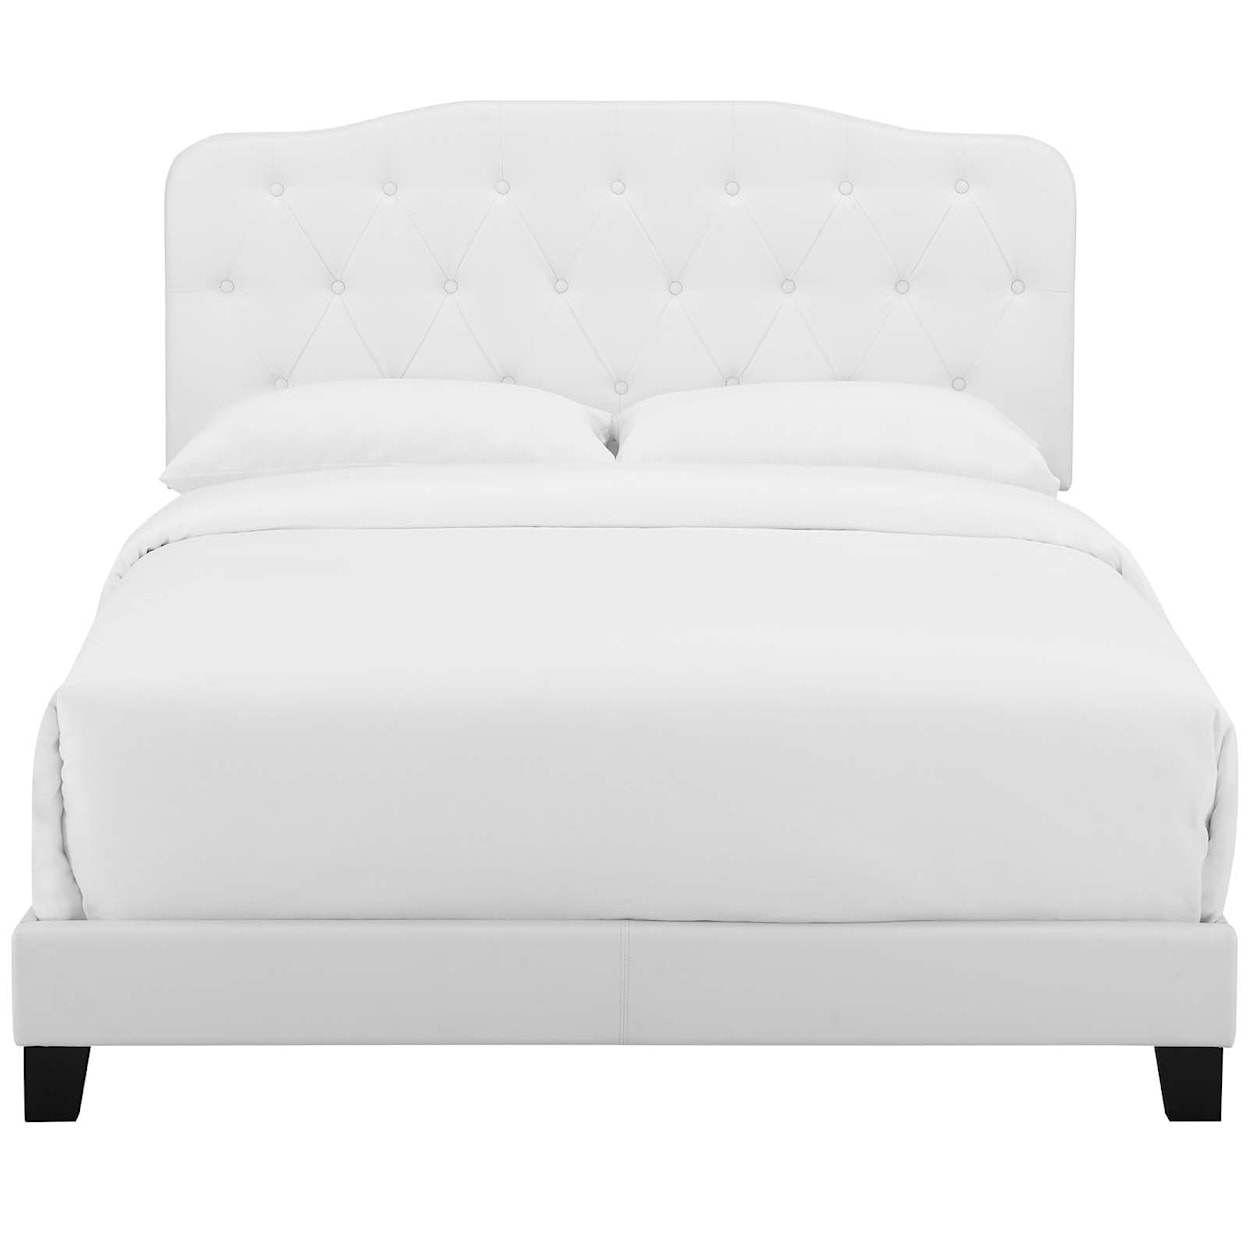 Modway Amelia Twin Faux Leather Bed